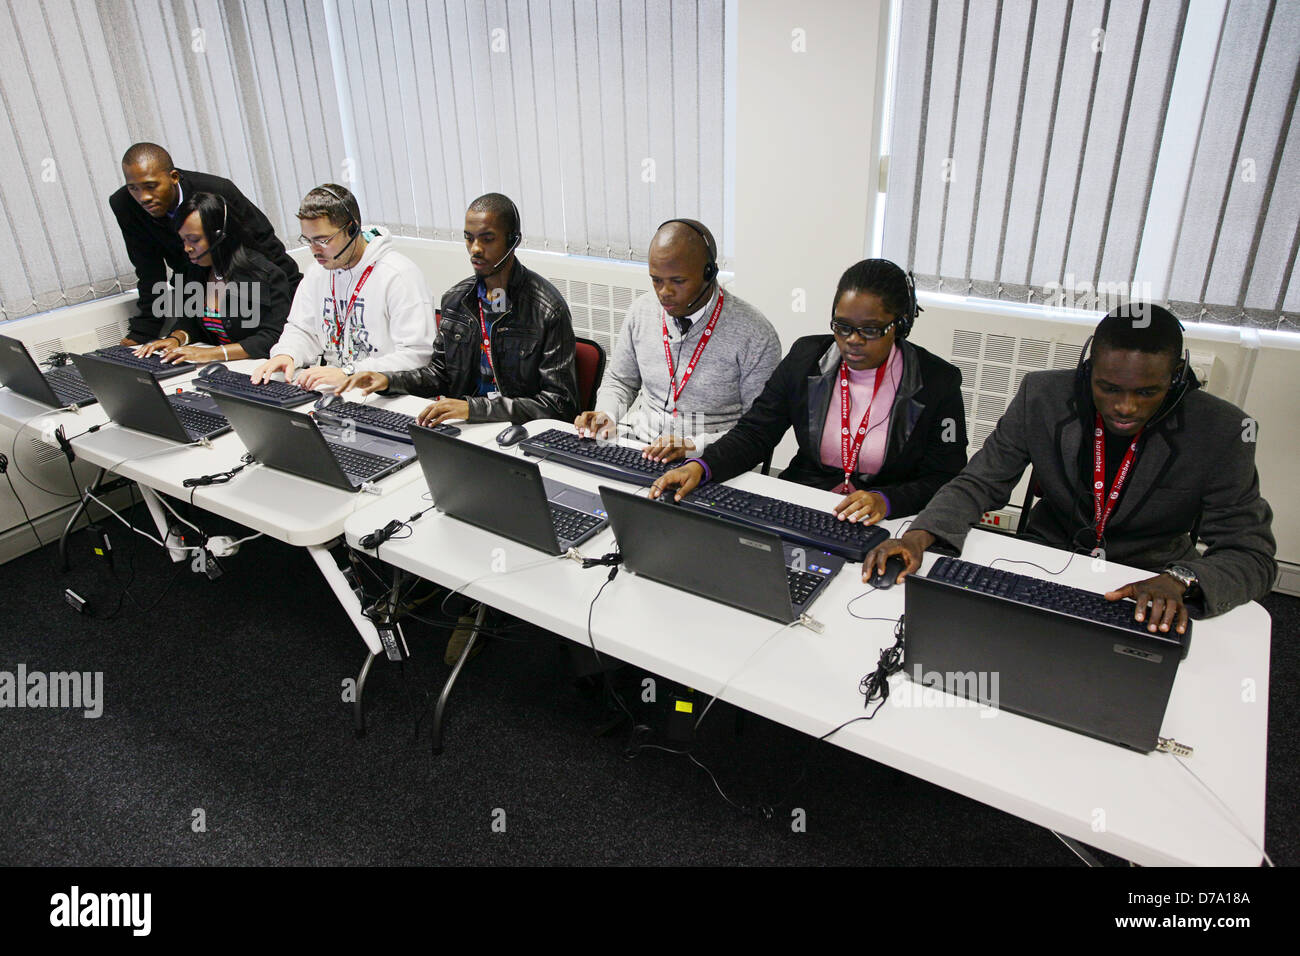 Cape Town based students training to be entry-level workers on computers and in call centers Stock Photo